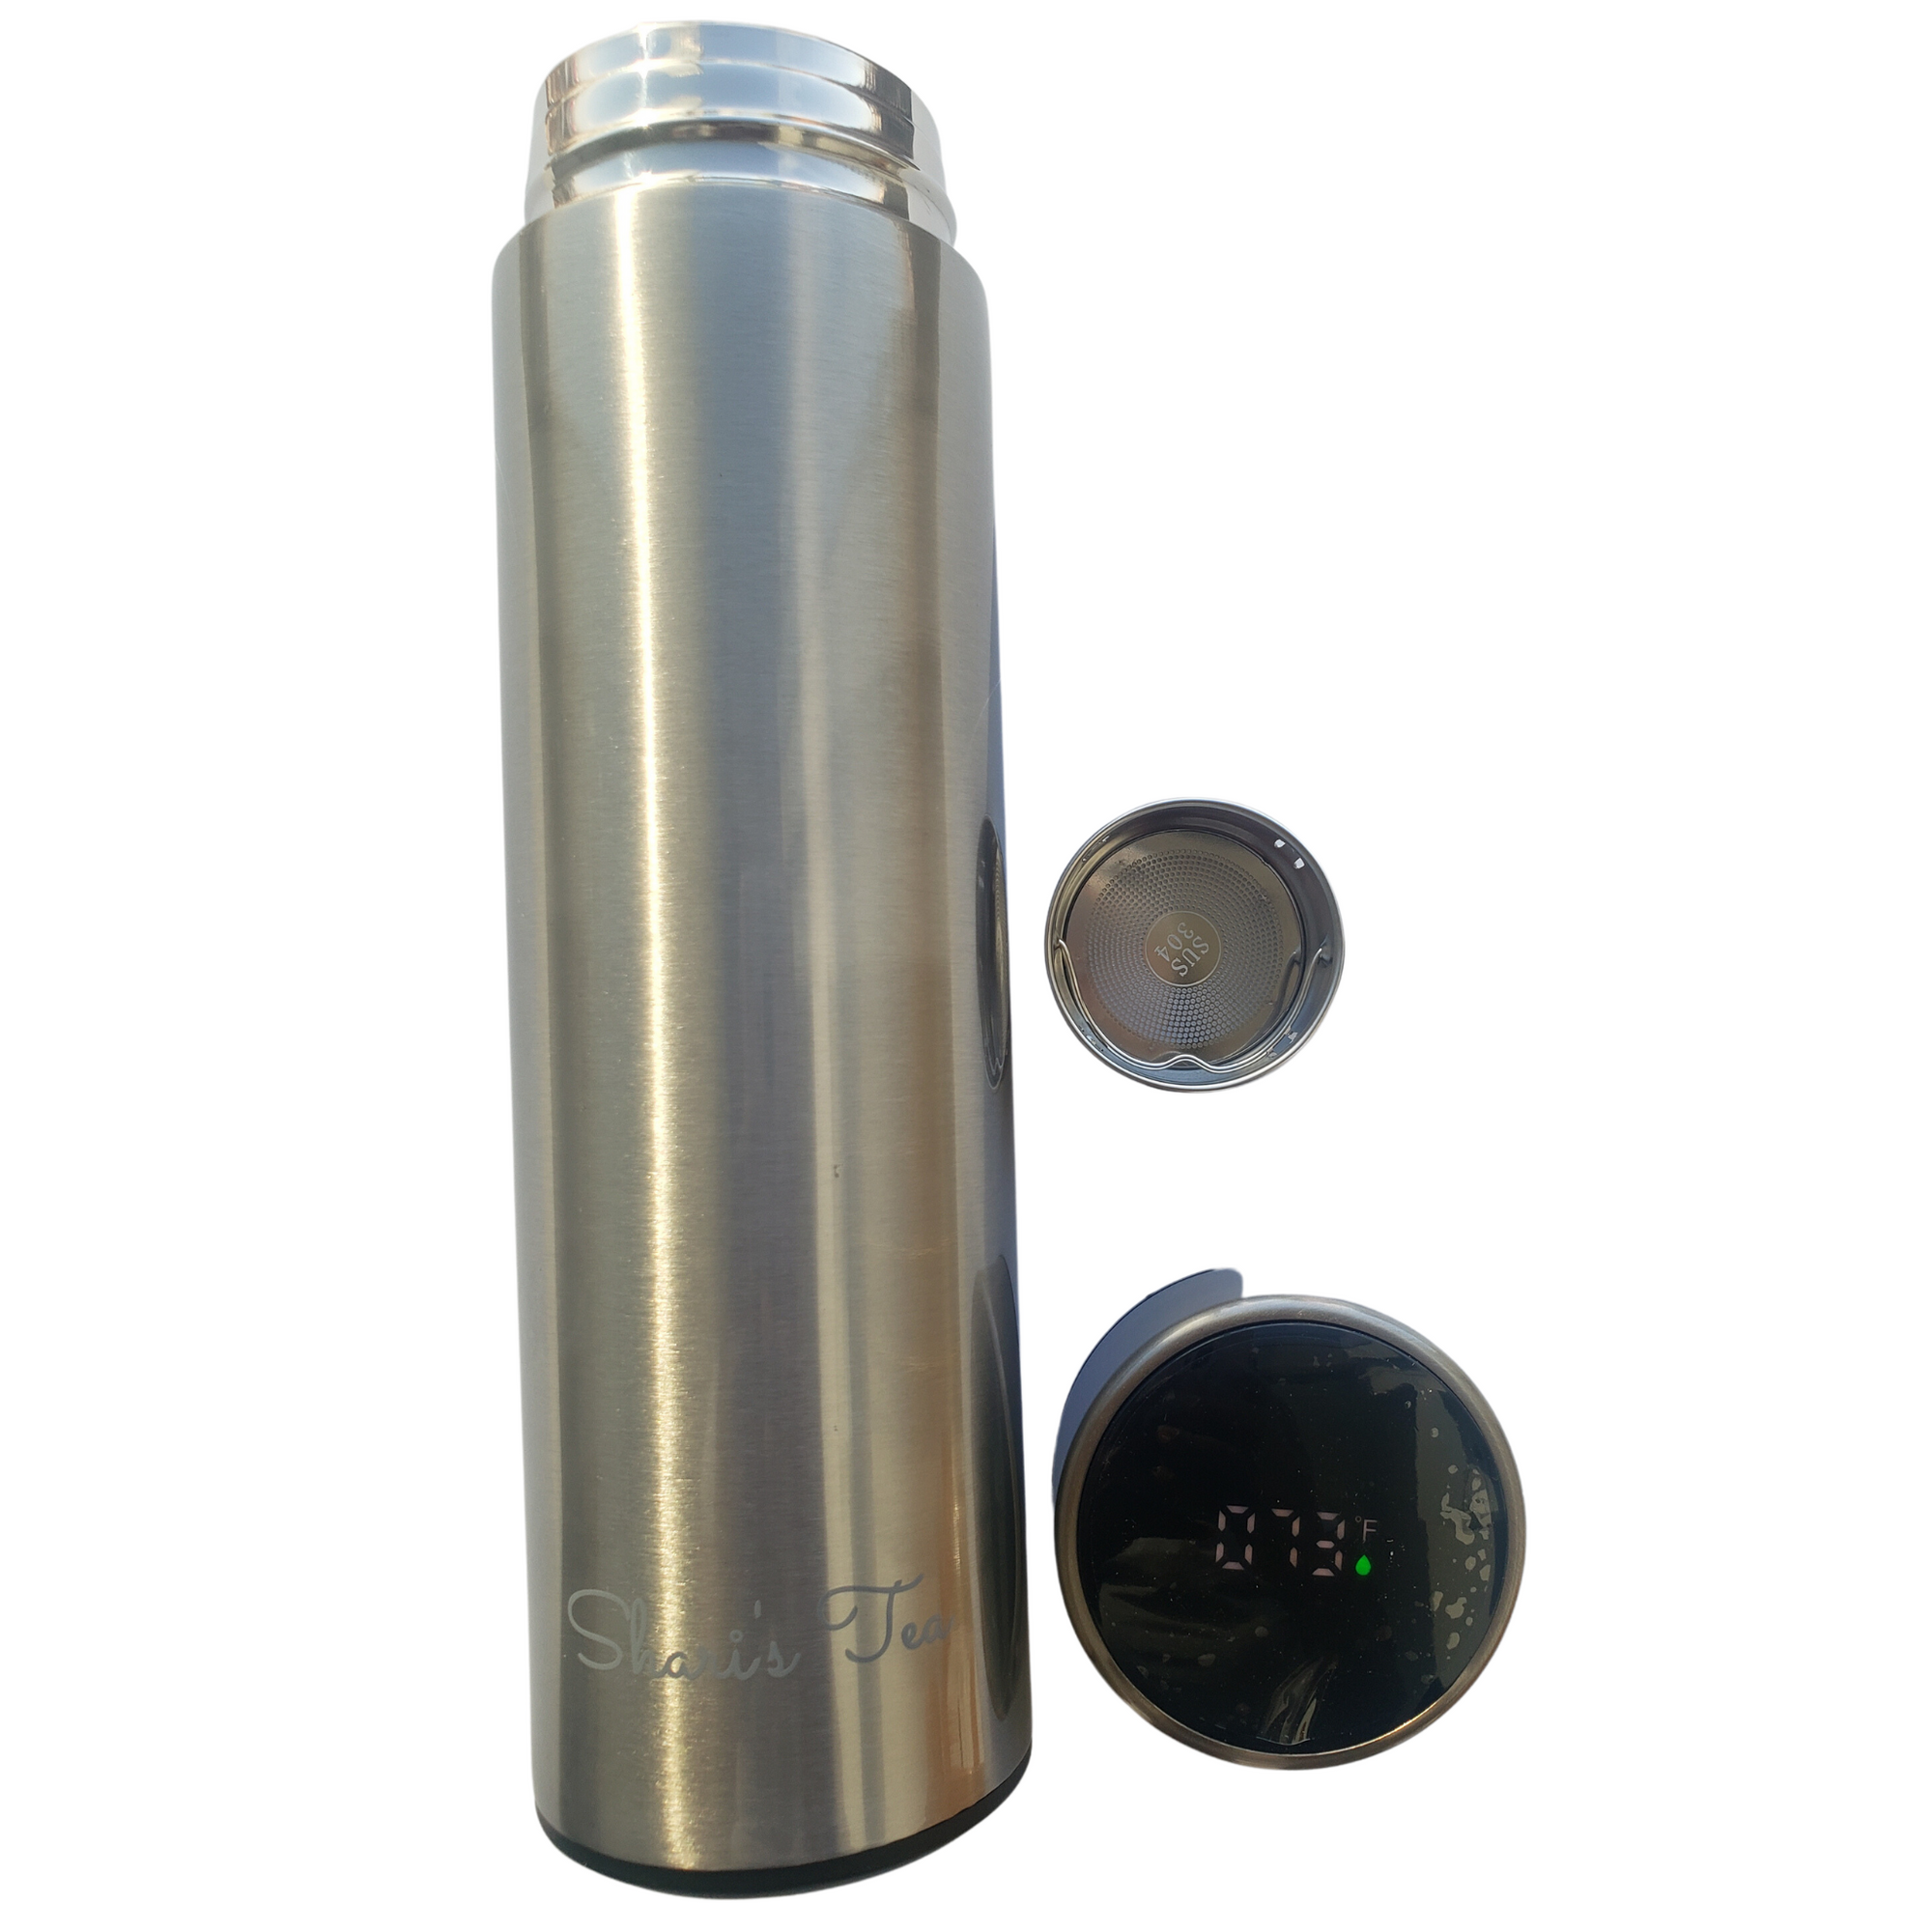 Tea Thermos with Digital Temperature Gauge and Infuser - Sliver